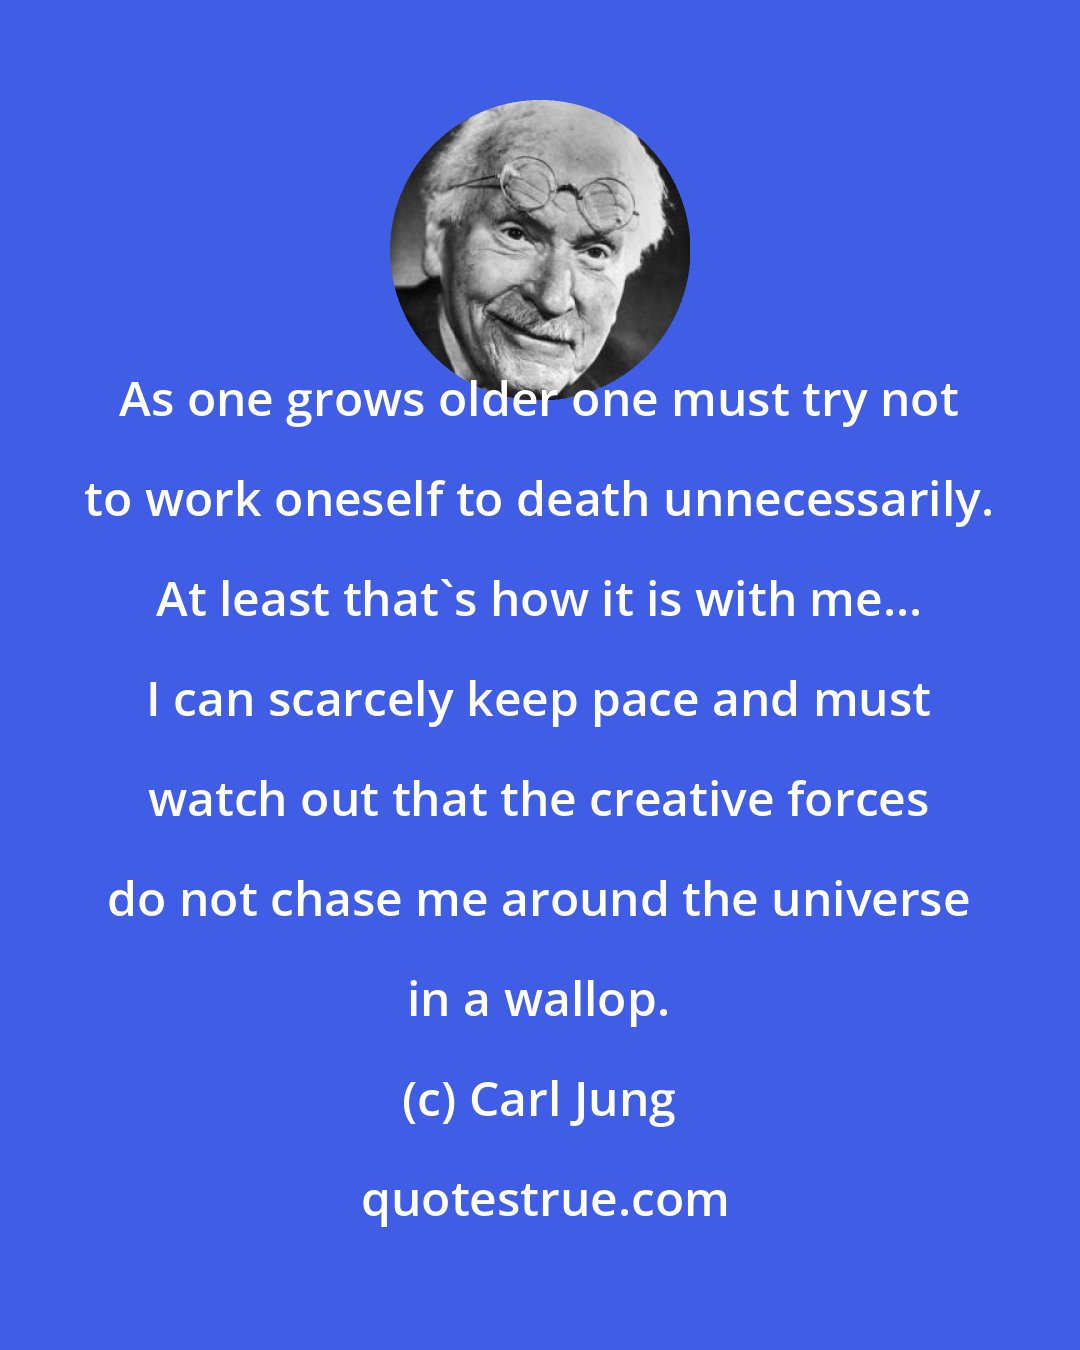 Carl Jung: As one grows older one must try not to work oneself to death unnecessarily. At least that's how it is with me... I can scarcely keep pace and must watch out that the creative forces do not chase me around the universe in a wallop.